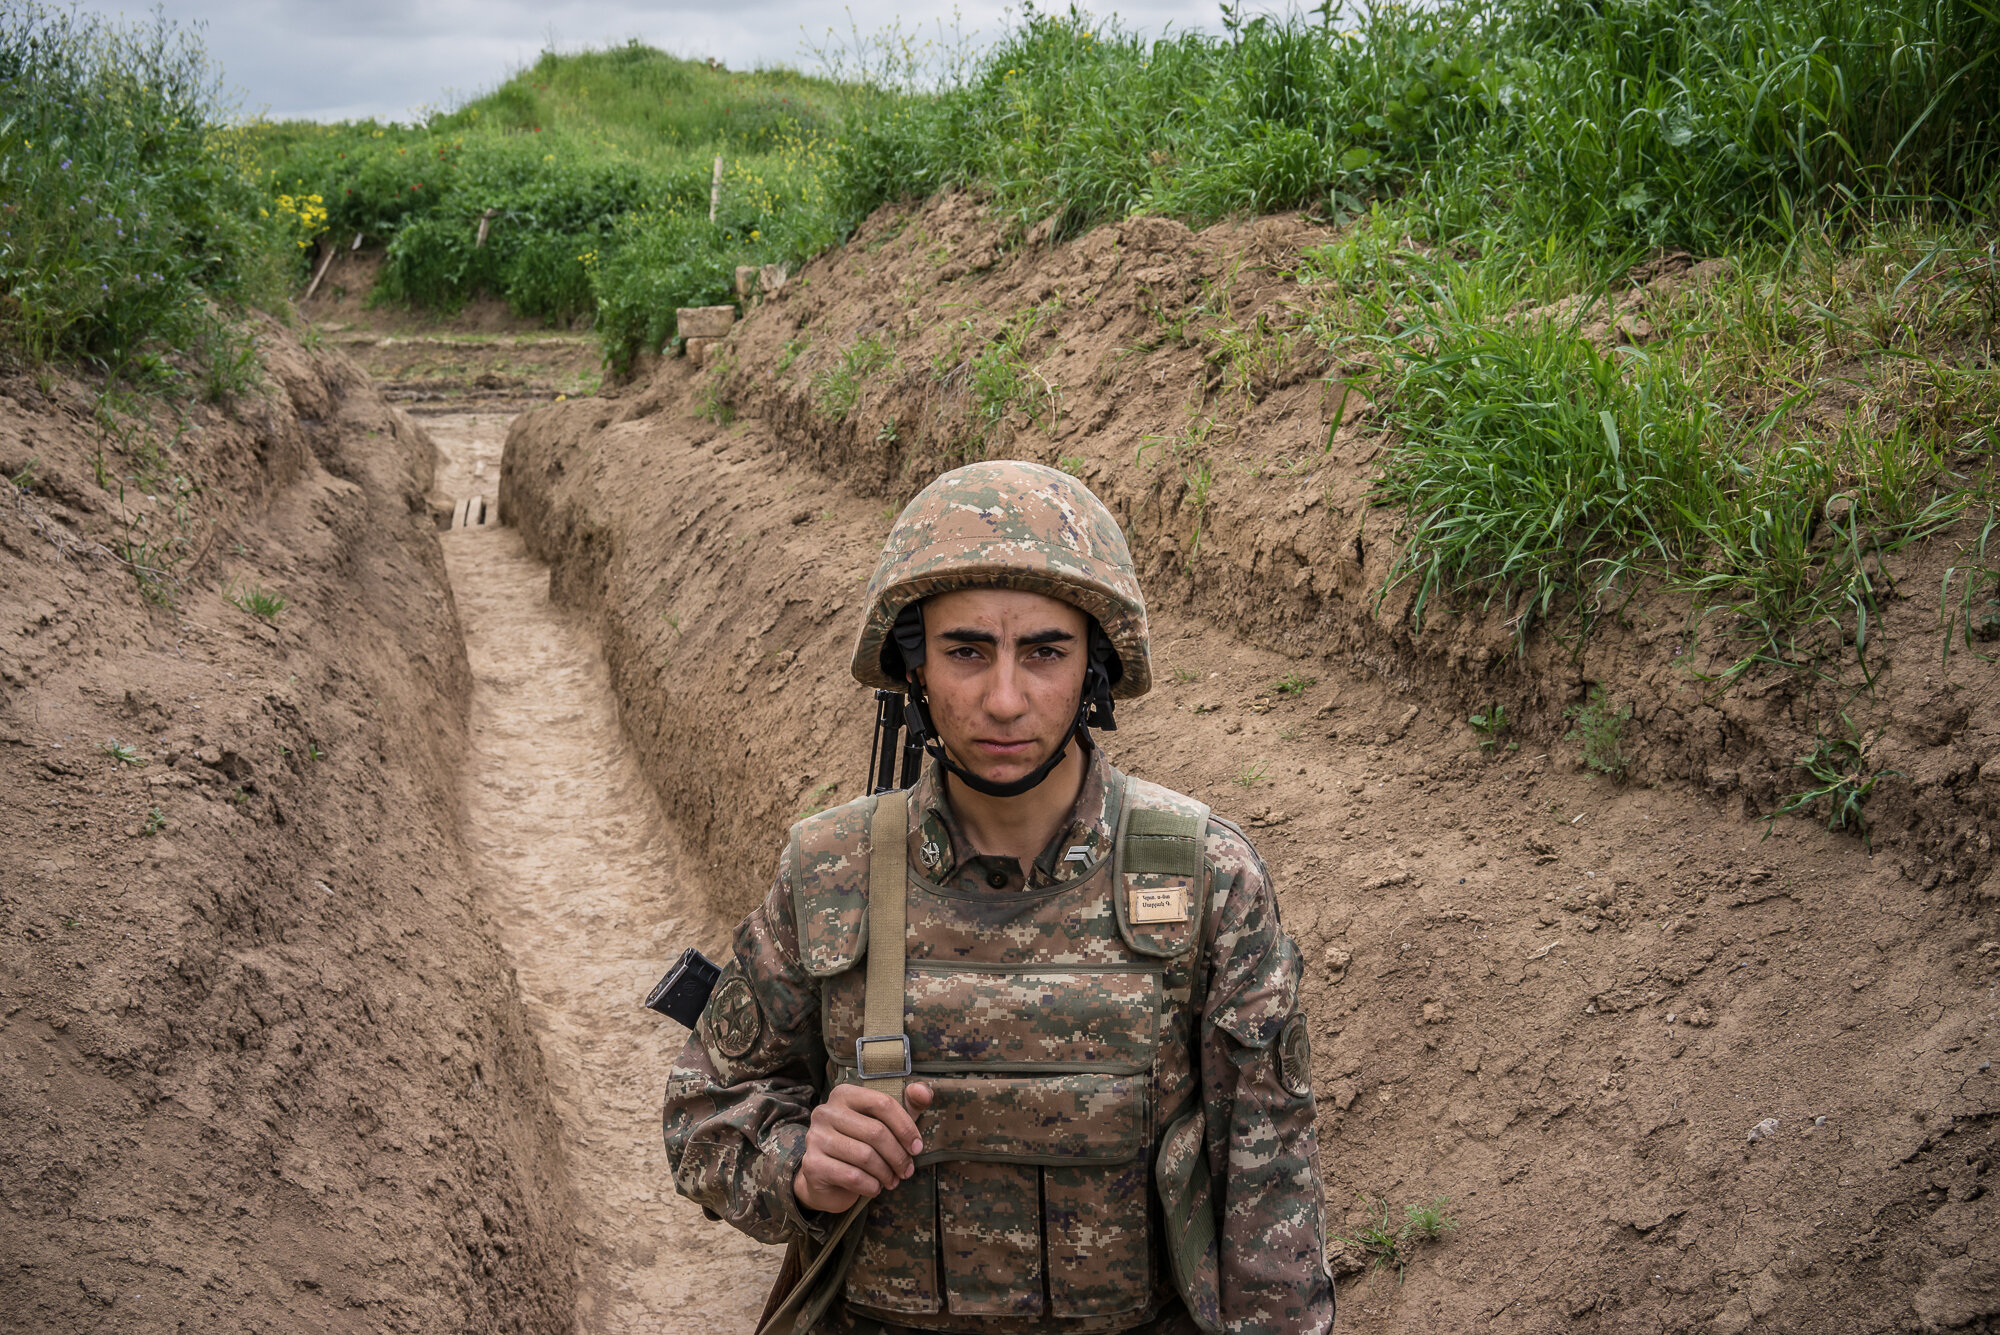  A member of the armed forces of Nagorno-Karabakh at a post along the line of contact with Azerbaijani forces in the eastern direction. Near Agdam, Nagorno-Karabakh. 2015. 